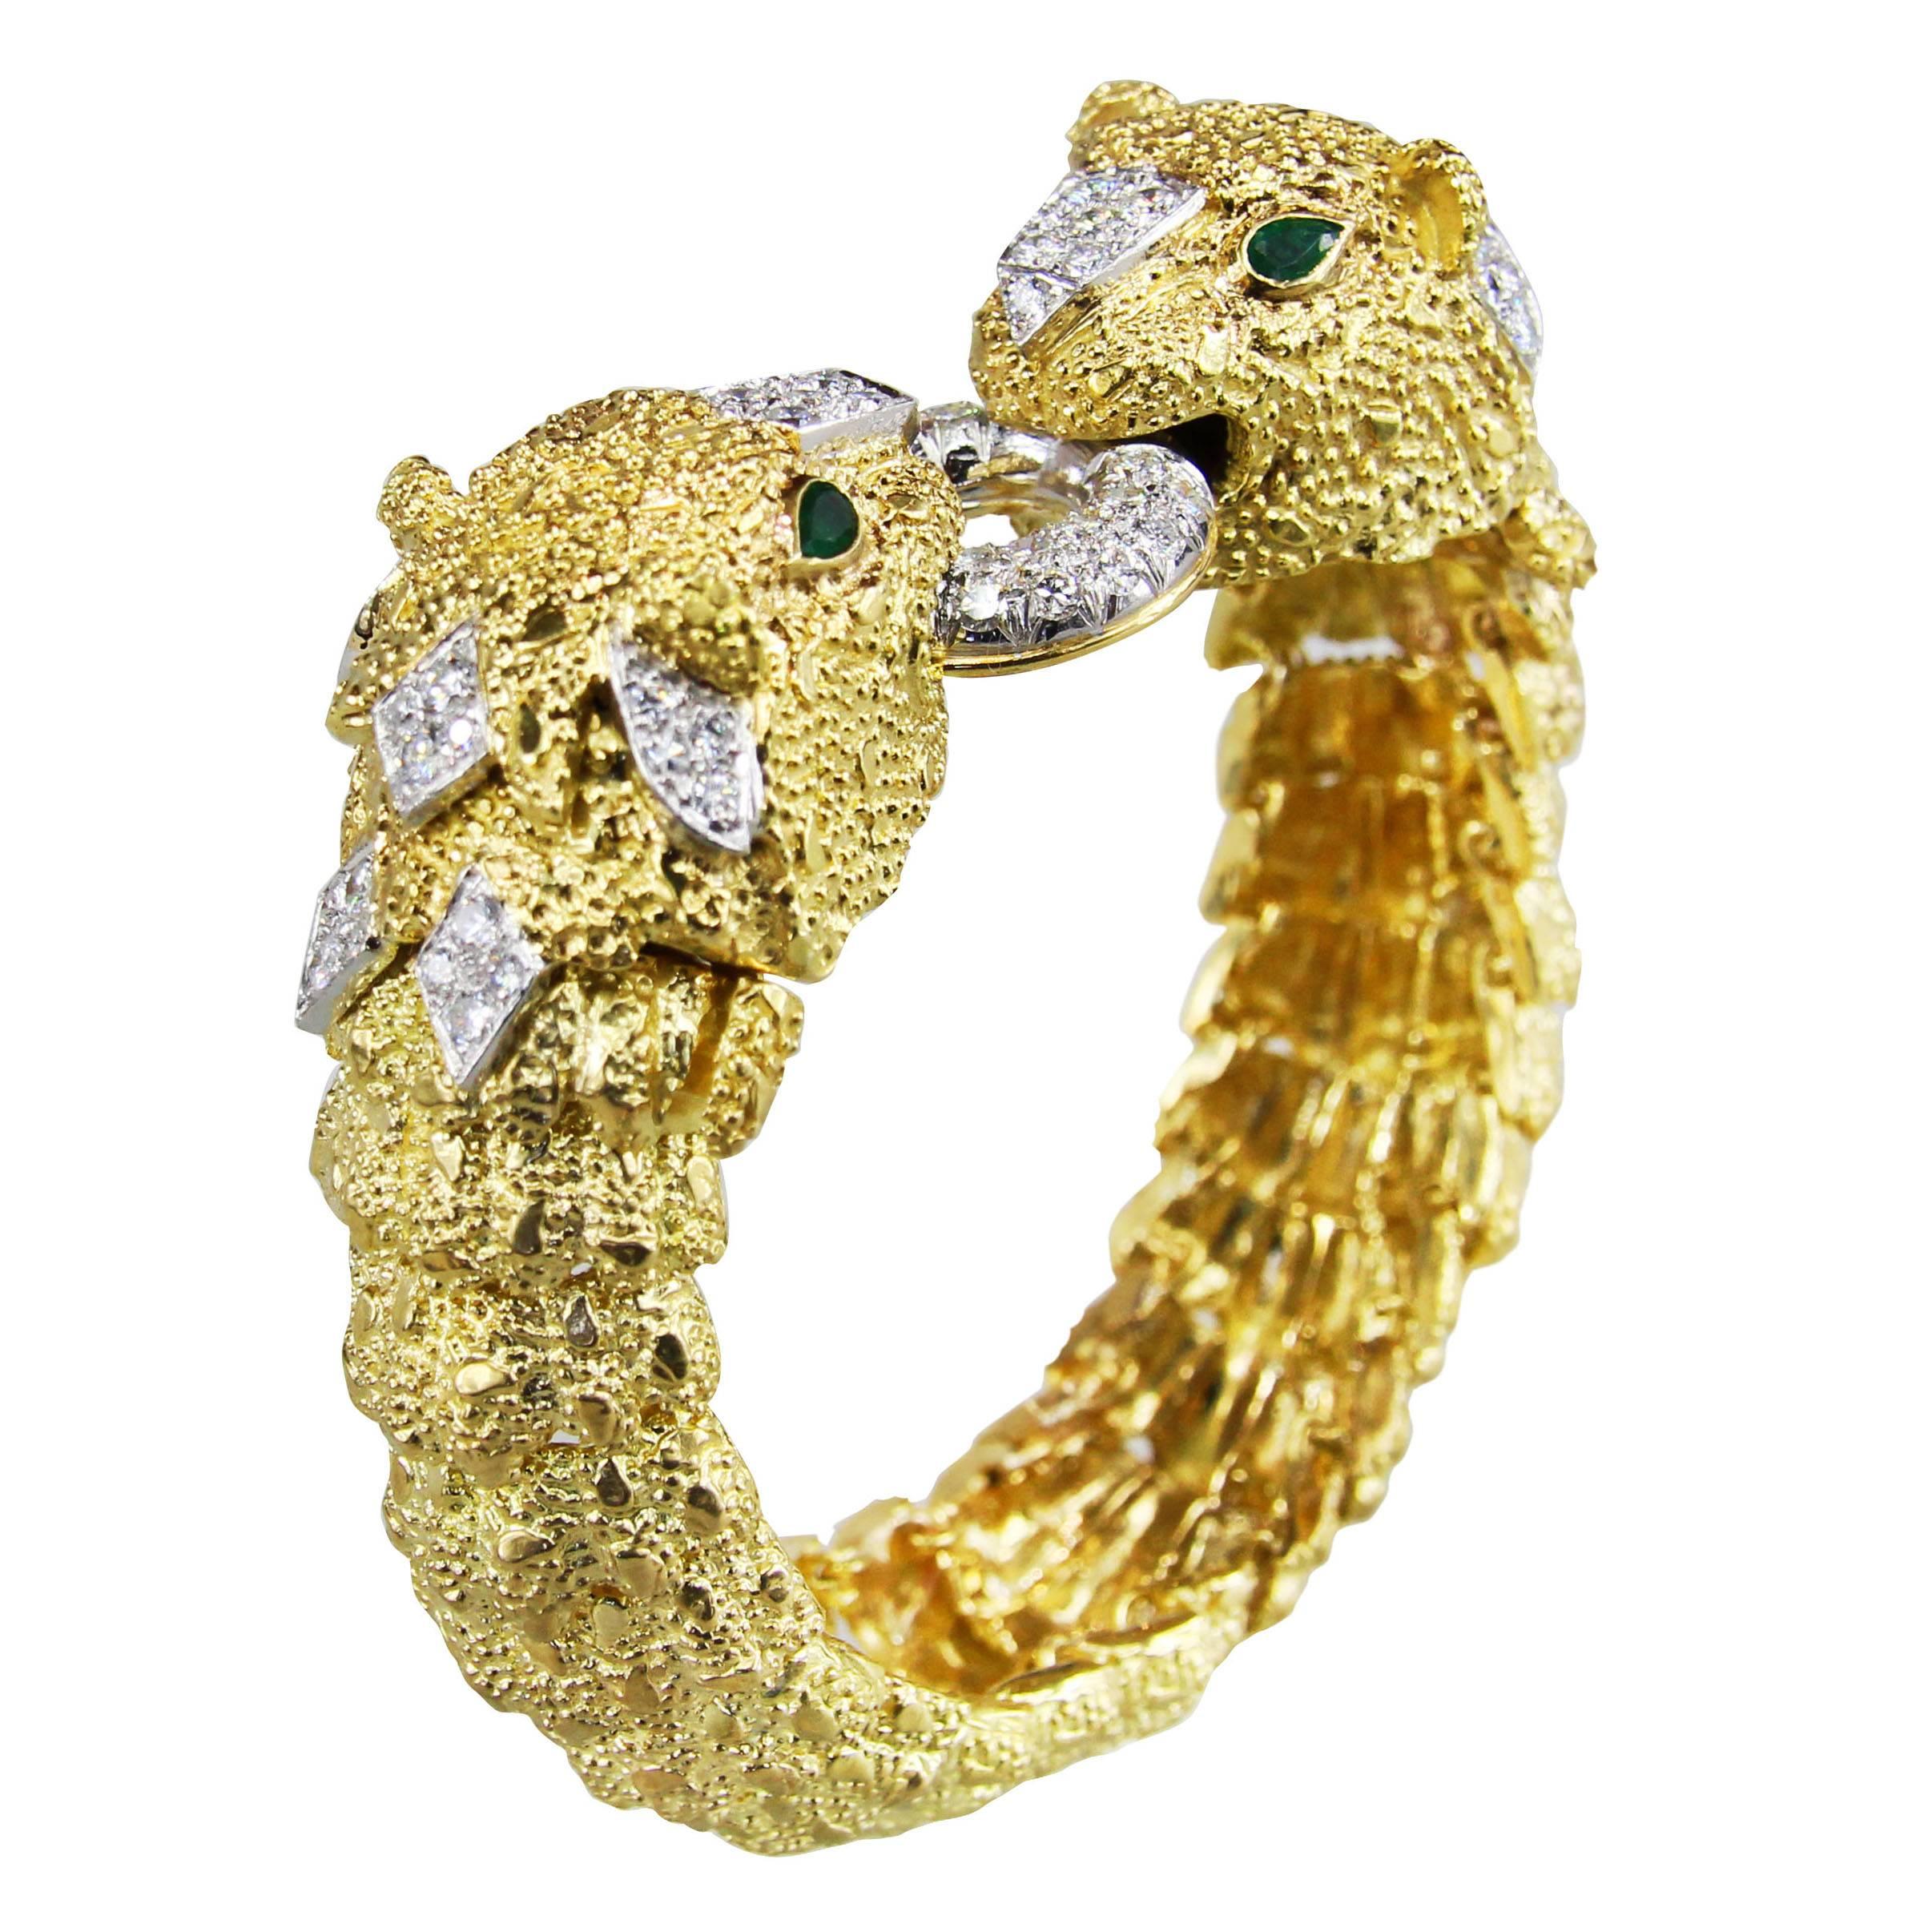 Gold and diamond bracelet with textured links, and an interchangeable faceted emerald bead section consisting of 9 strands. The panther heads have round diamonds weighing approximately 2.50 carats. The inner bracelet is 6 1/2 inches. 